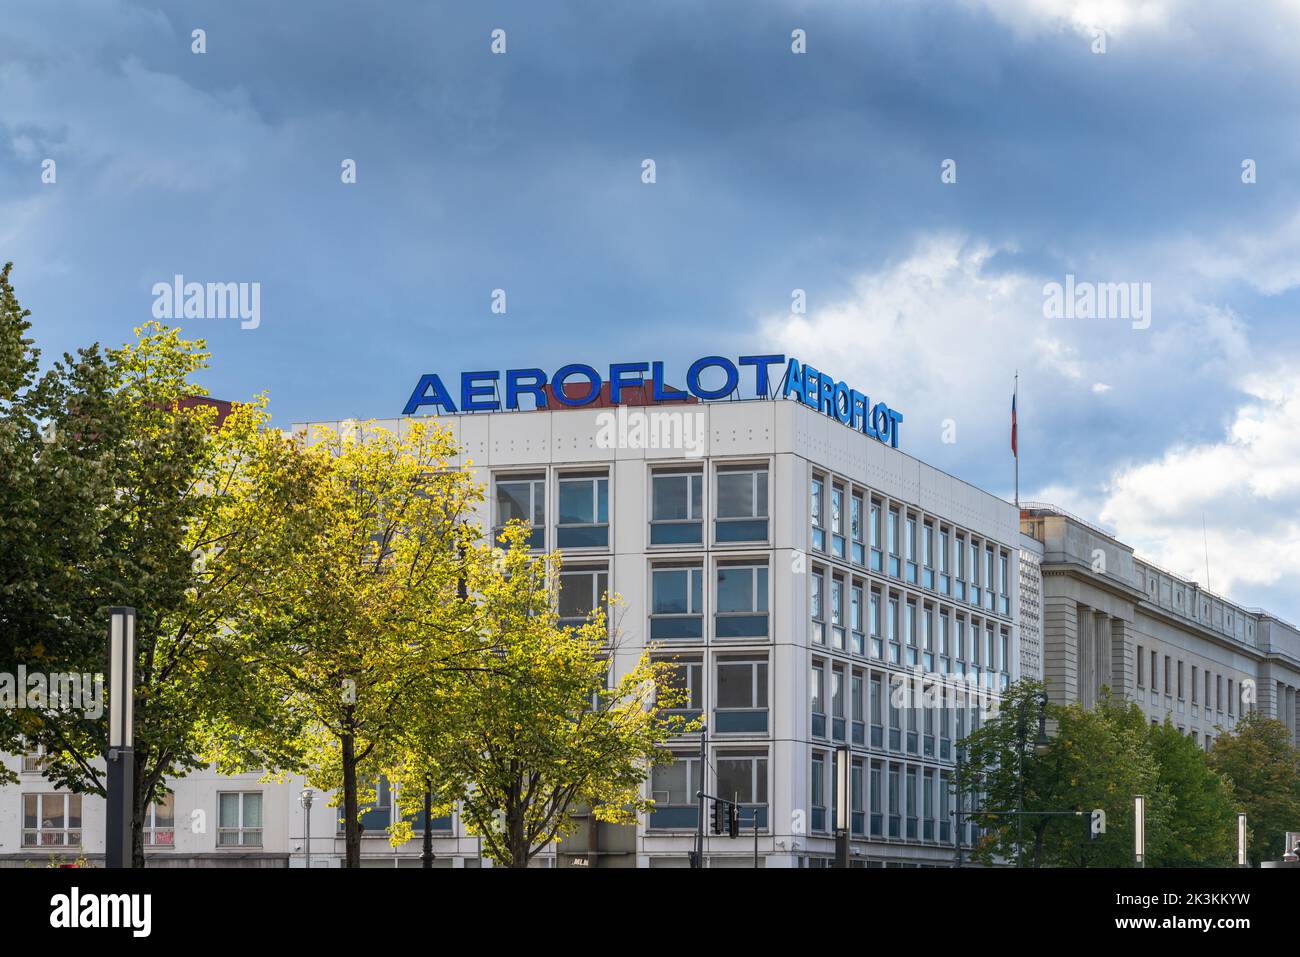 Aeroflot Russian airline offices along Unter den Linded in Berlin, Germany, Europe Stock Photo